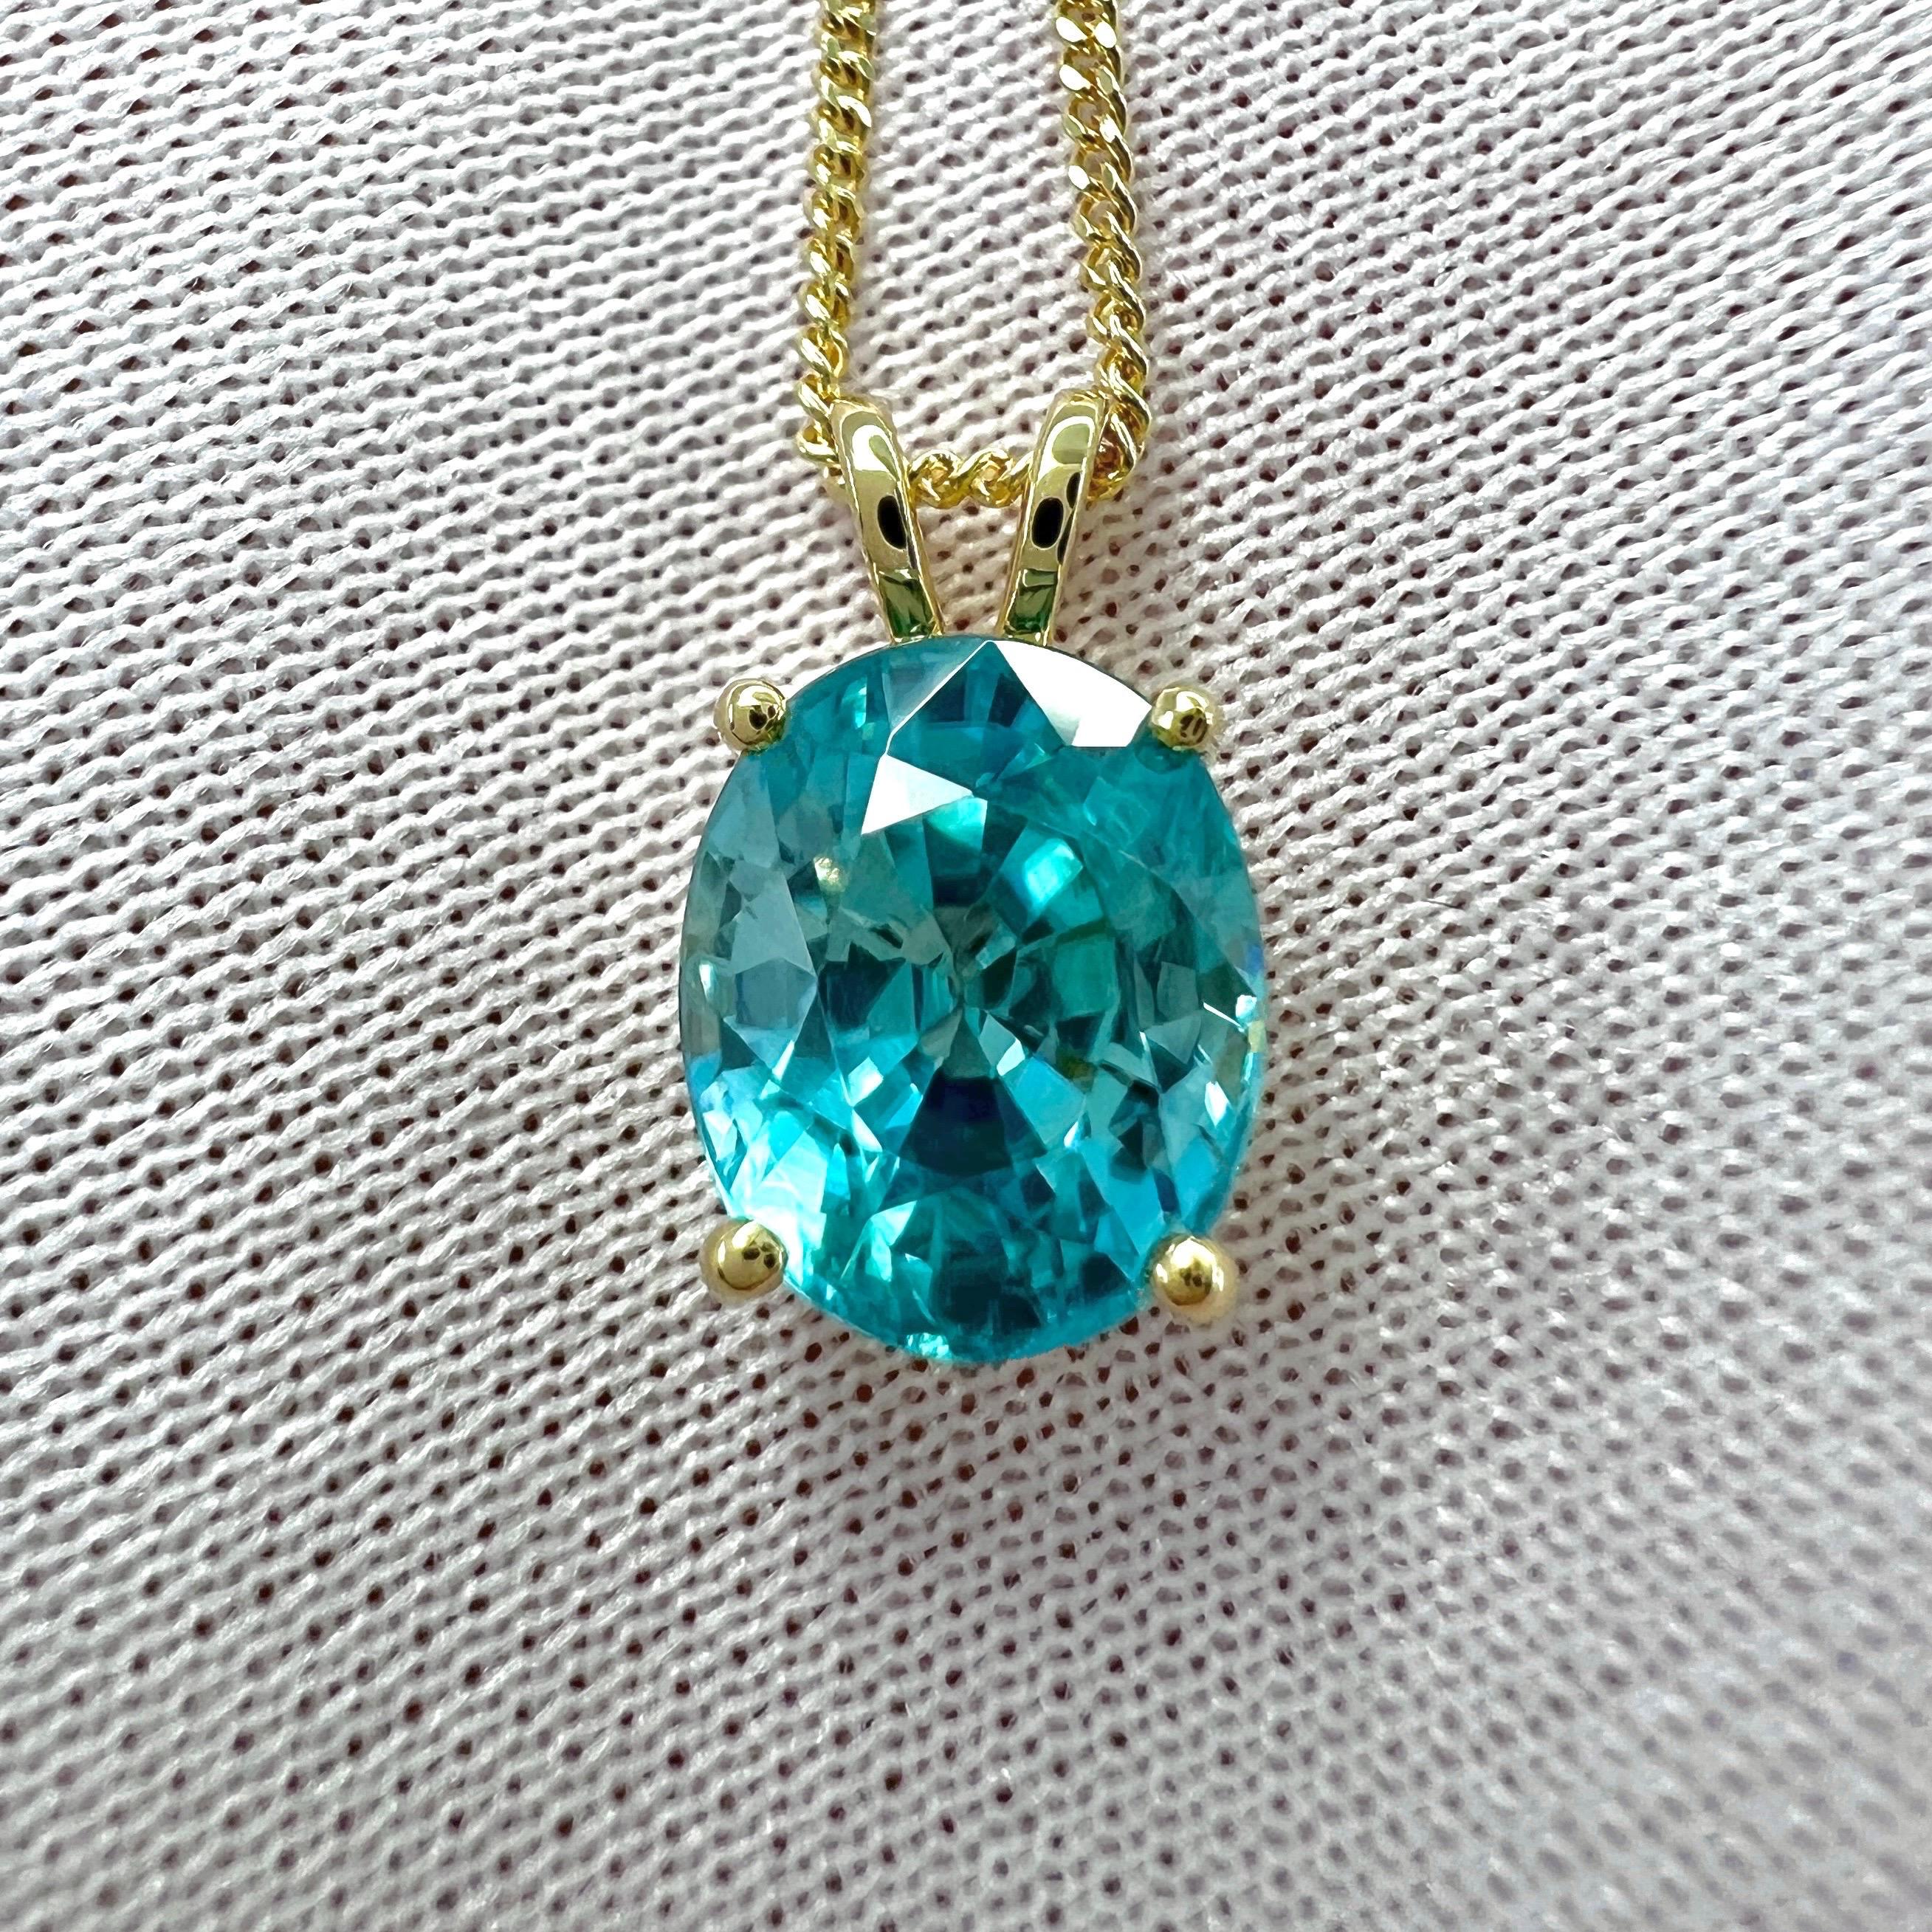 Natural Blue Zircon 3.78ct Oval Cut 18k Yellow Gold Pendant Necklace For Sale 3